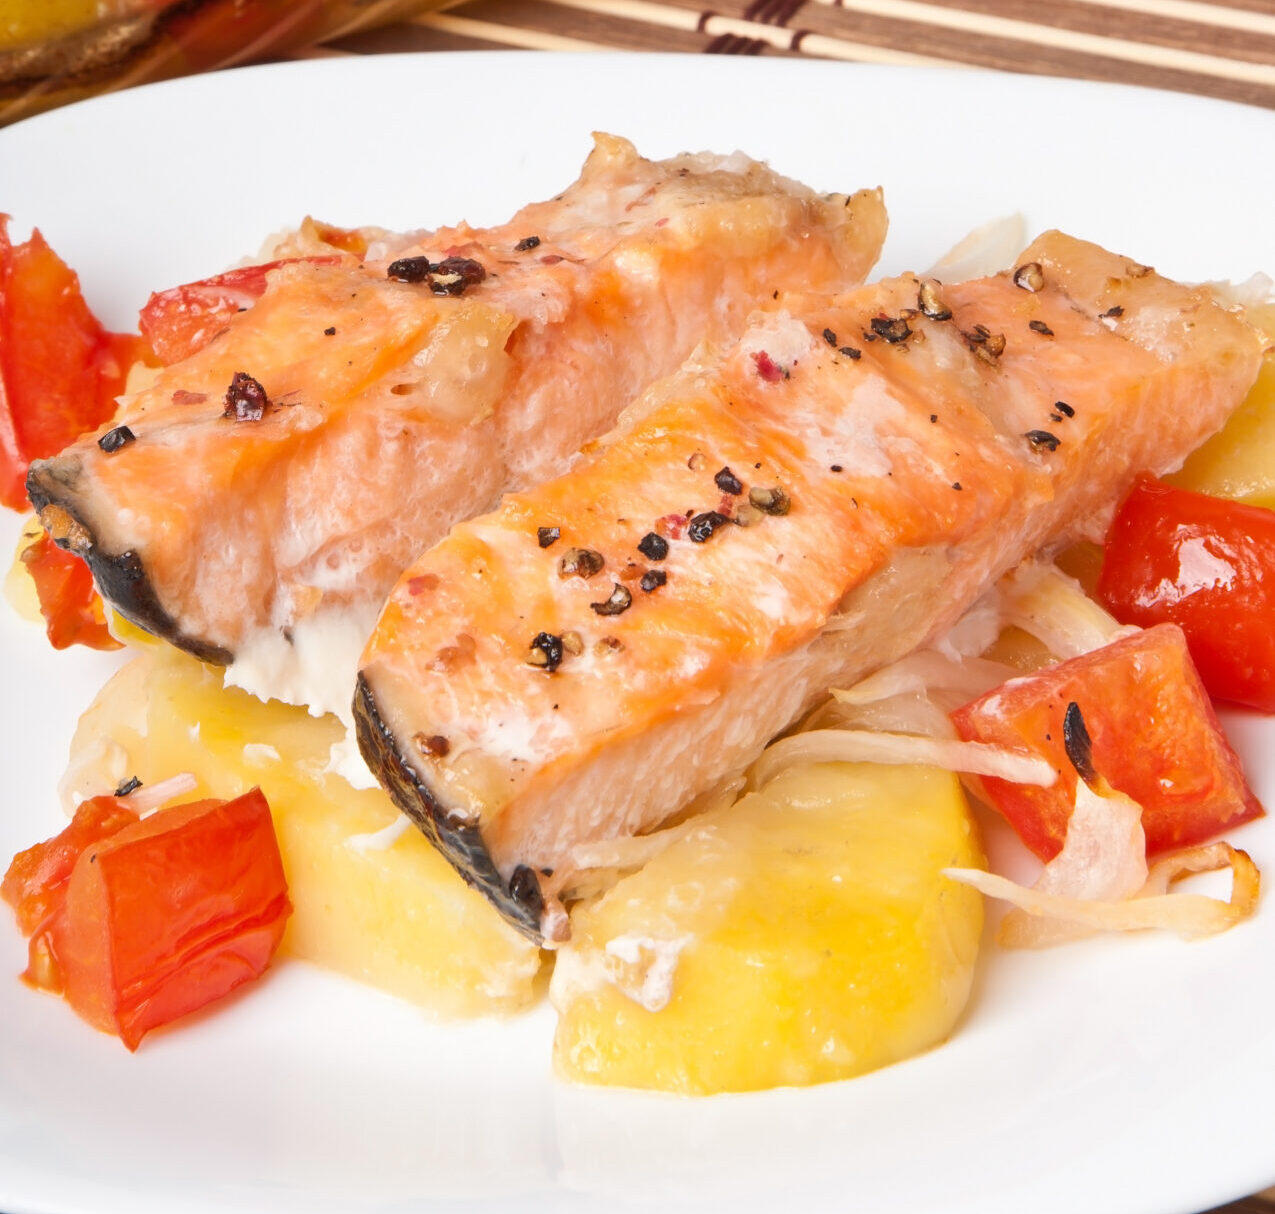 Pieces of salmon with potatoes, tomatoes and onions baked in the oven